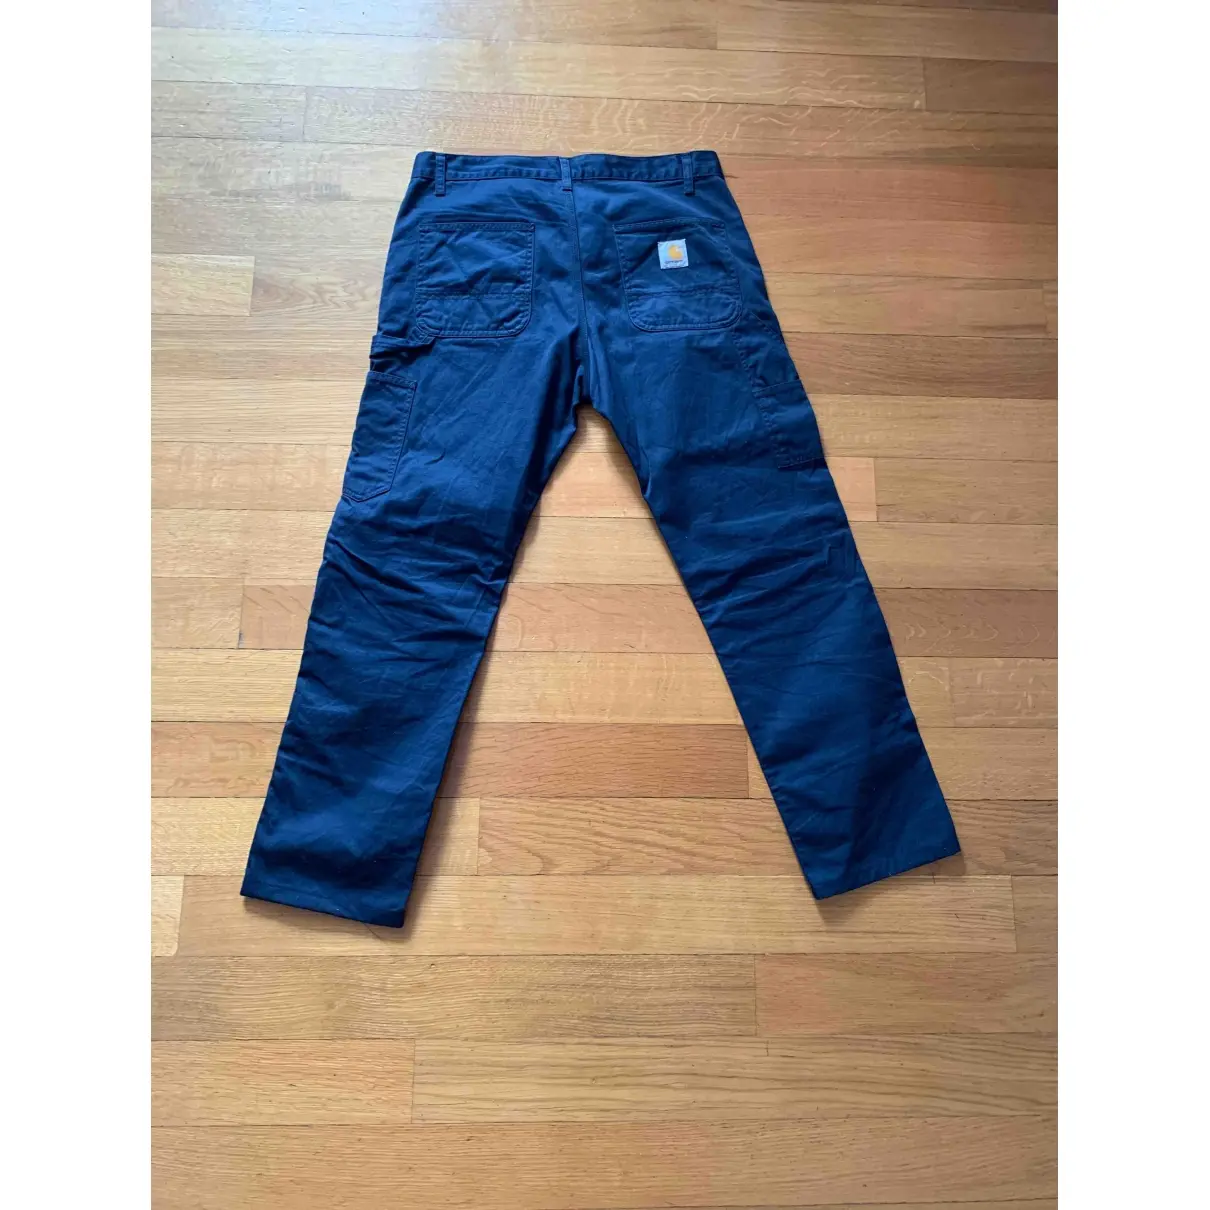 Carhartt Trousers for sale